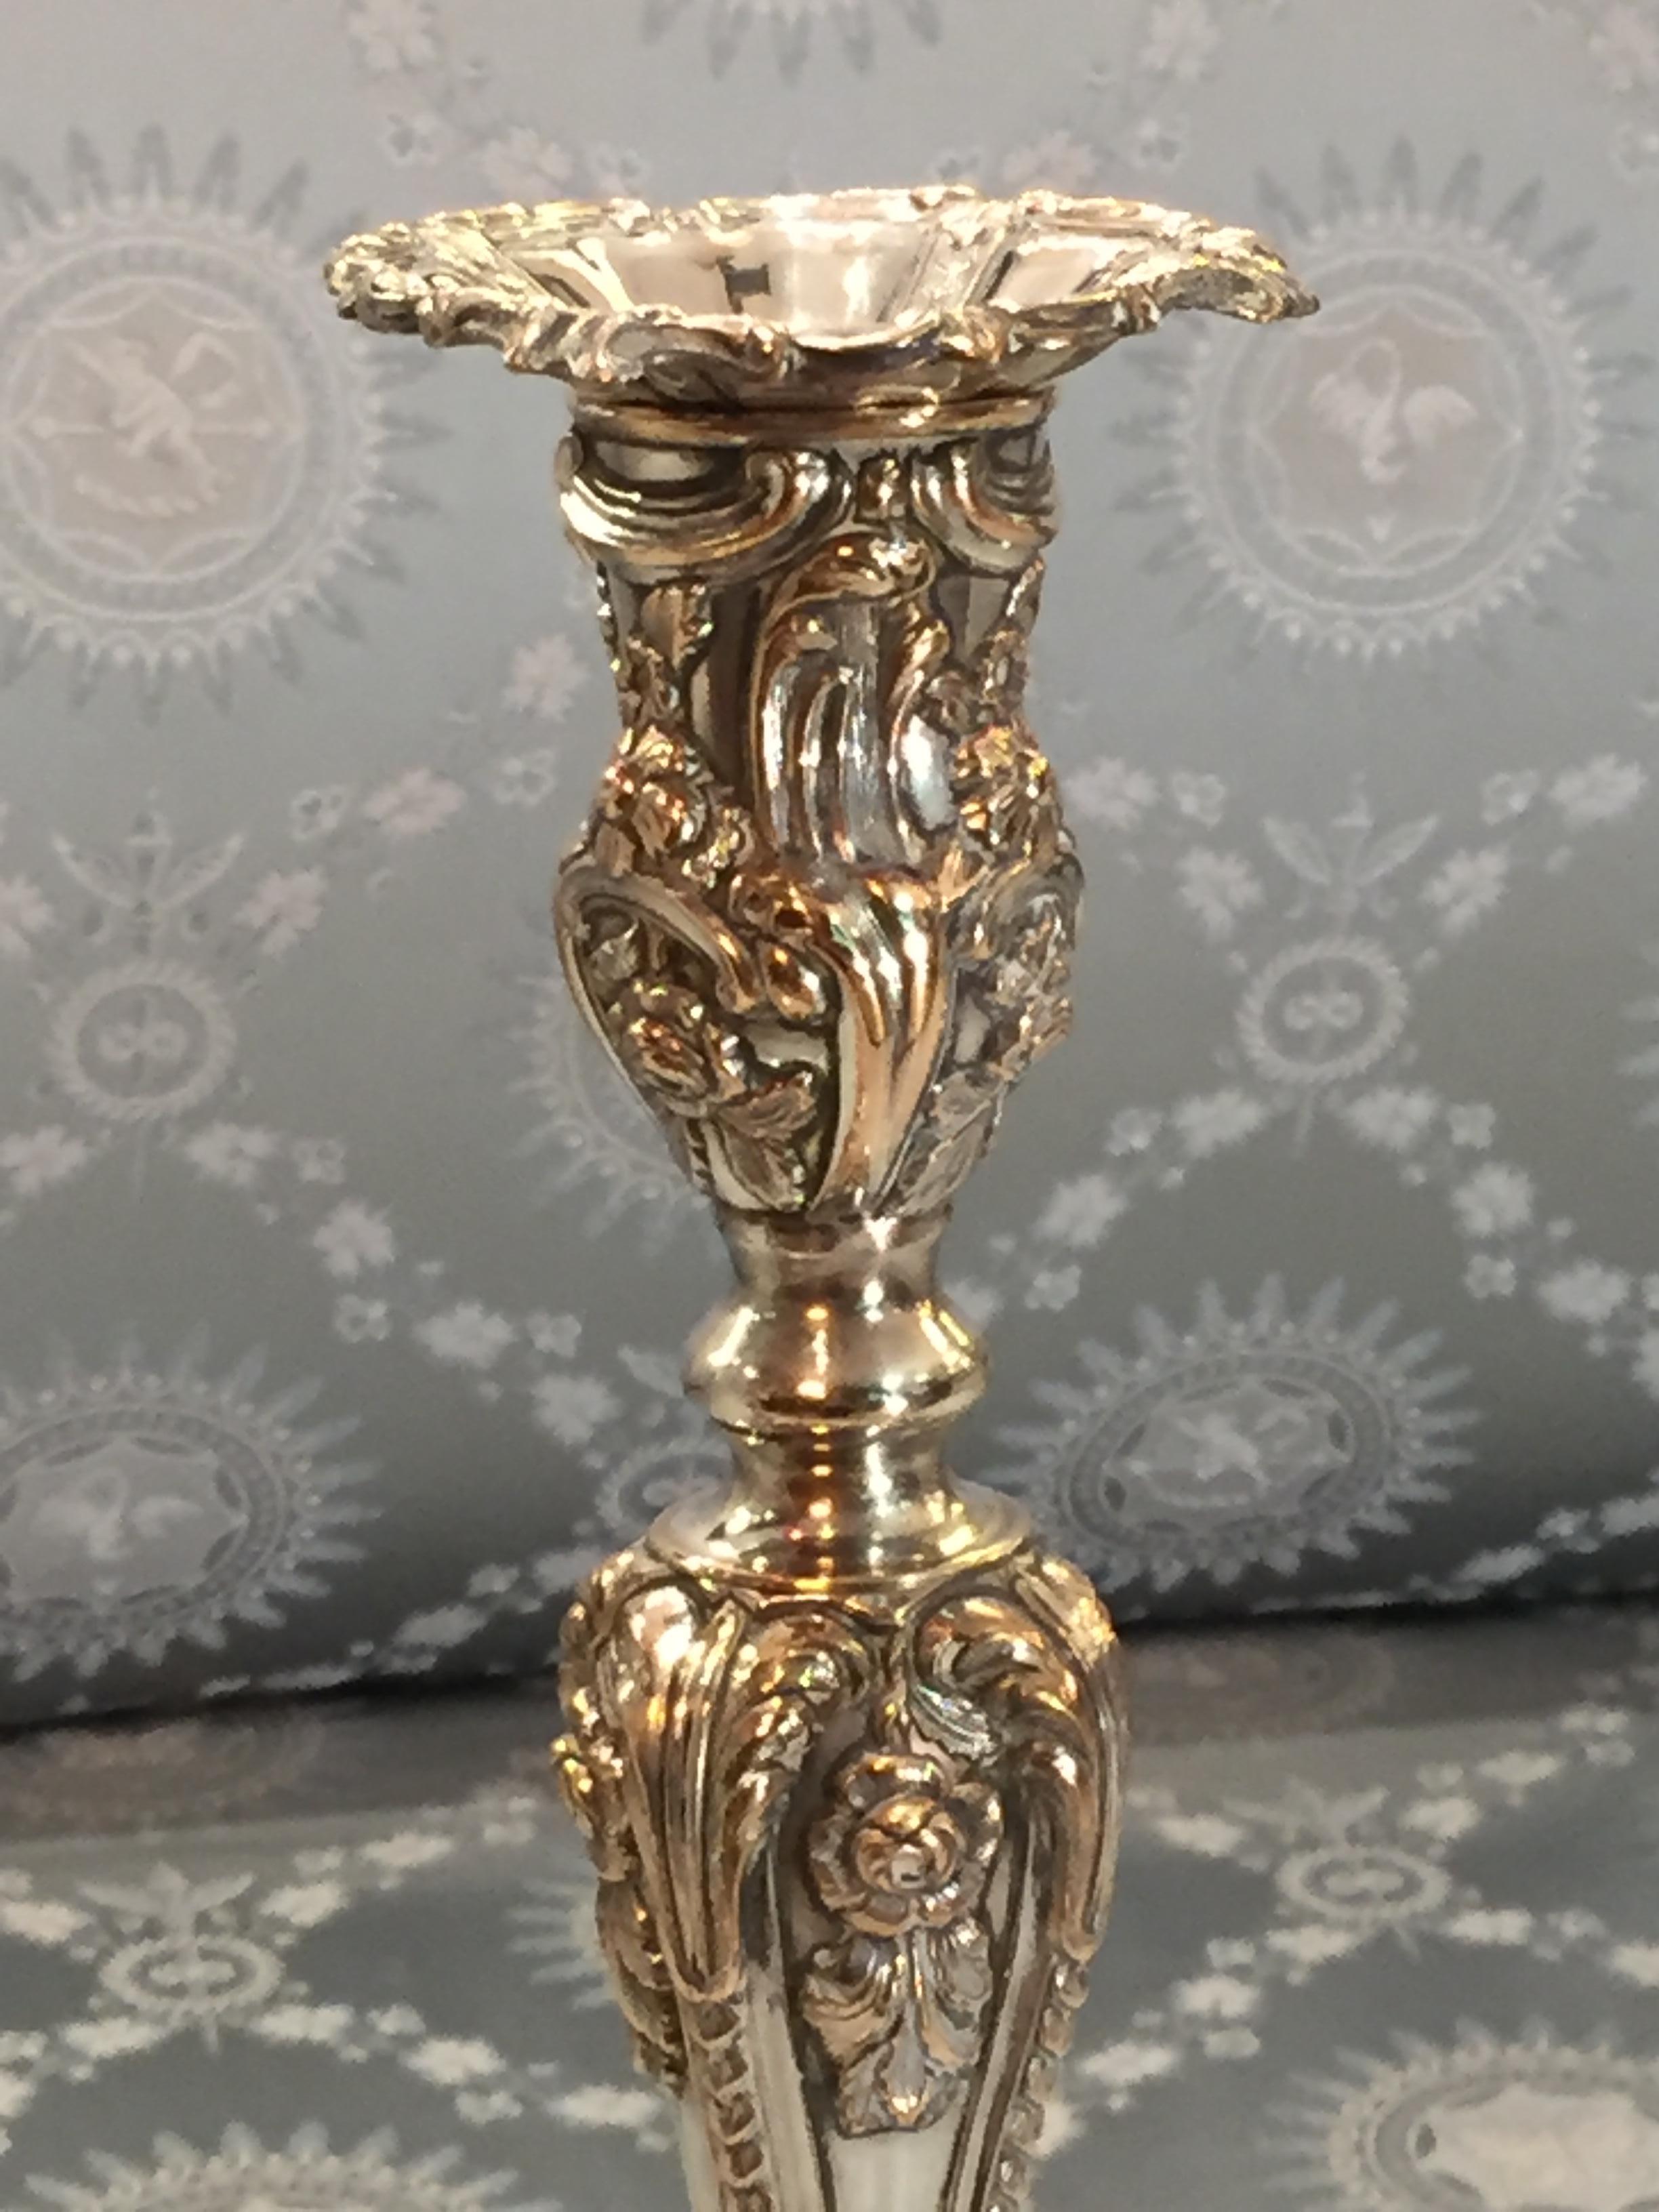 Plated Regency Period Rococo Revival Sheffield Plate Candlesticks by T and J Creswick For Sale